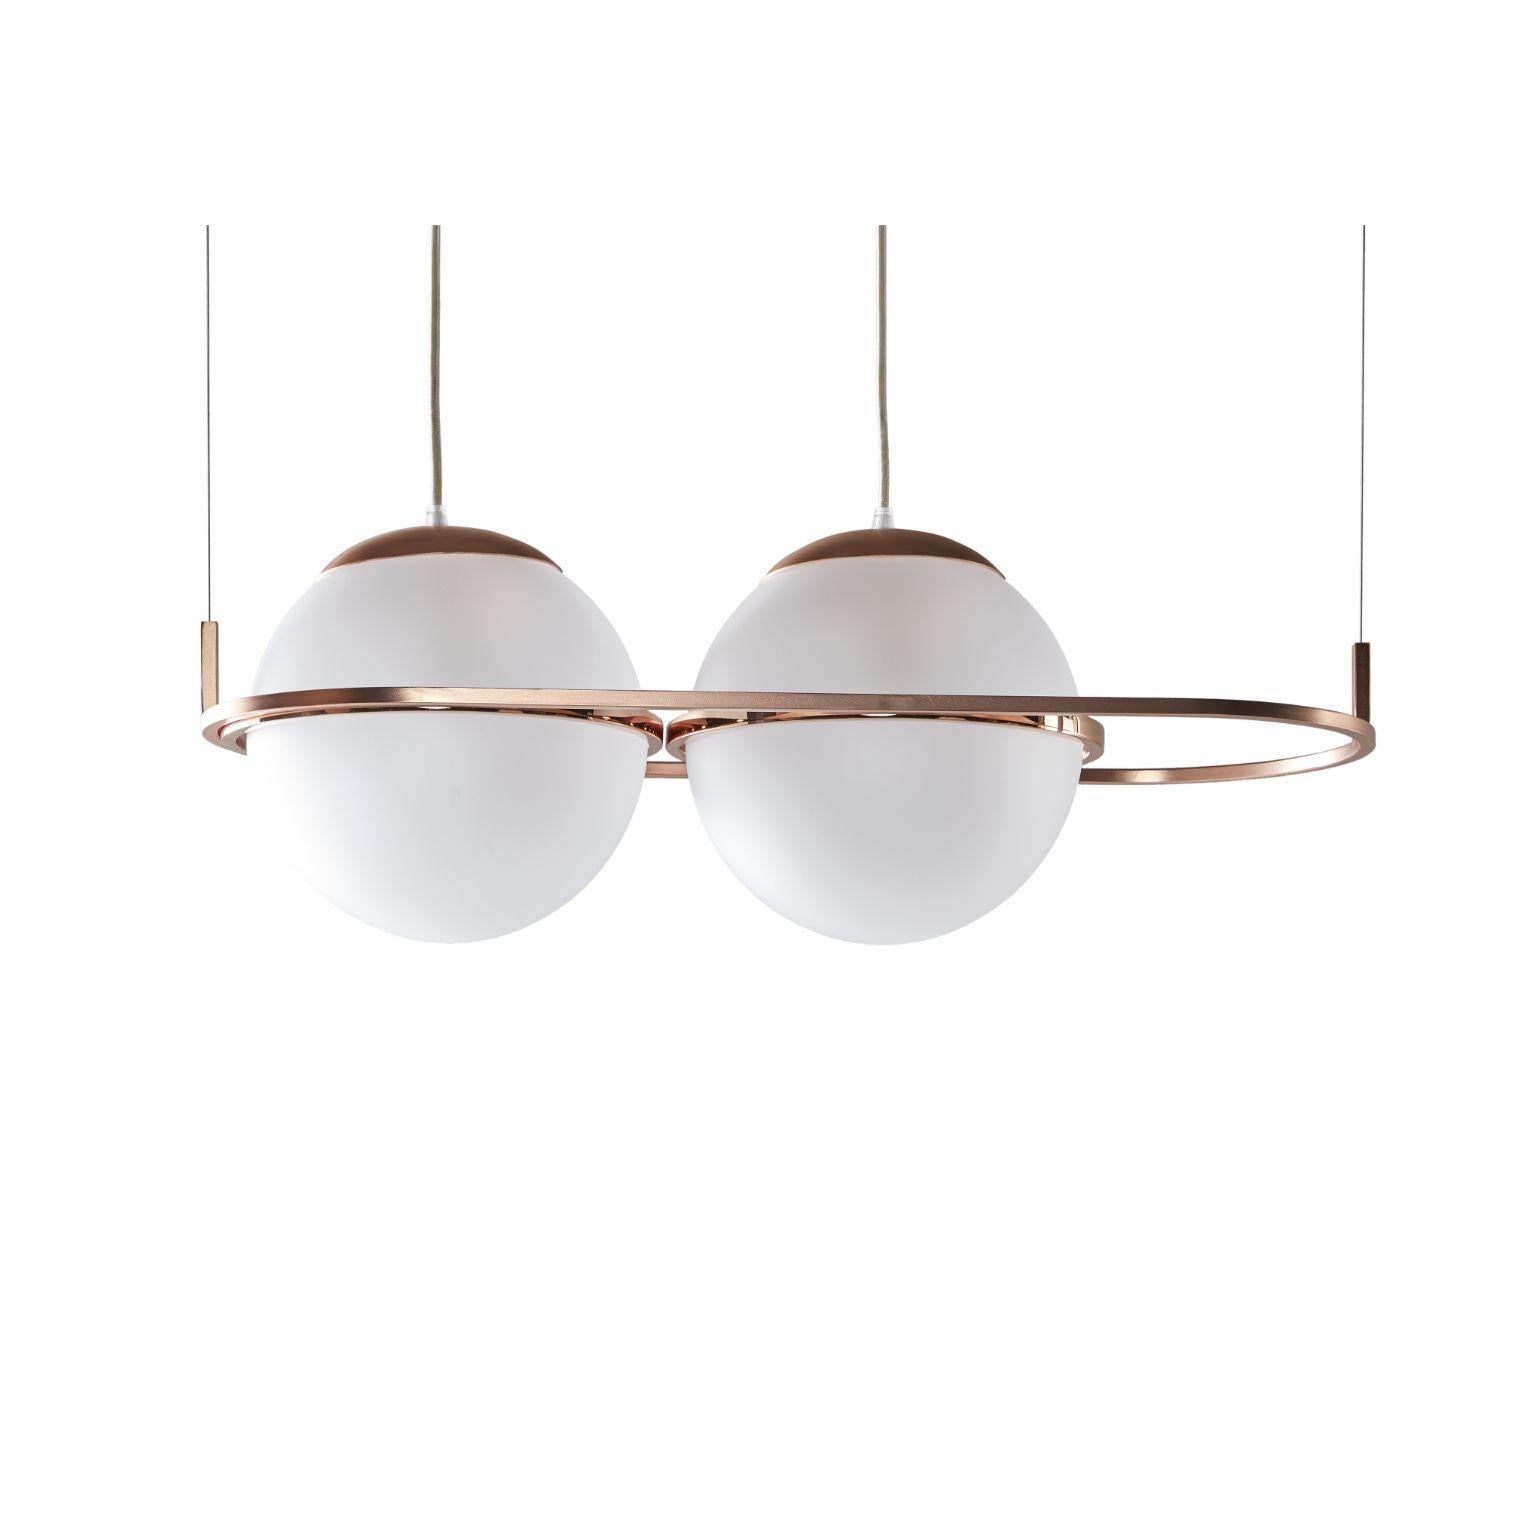 Decò ceiling lamp by Mingardo
Dimensions: D72.5 x W30 x H25 cm 
Materials: Matte and polished copper frame,blown glass.
Weight: 10 kg

Also Available in different finishes.

All our lamps can be wired according to each country. If sold to the